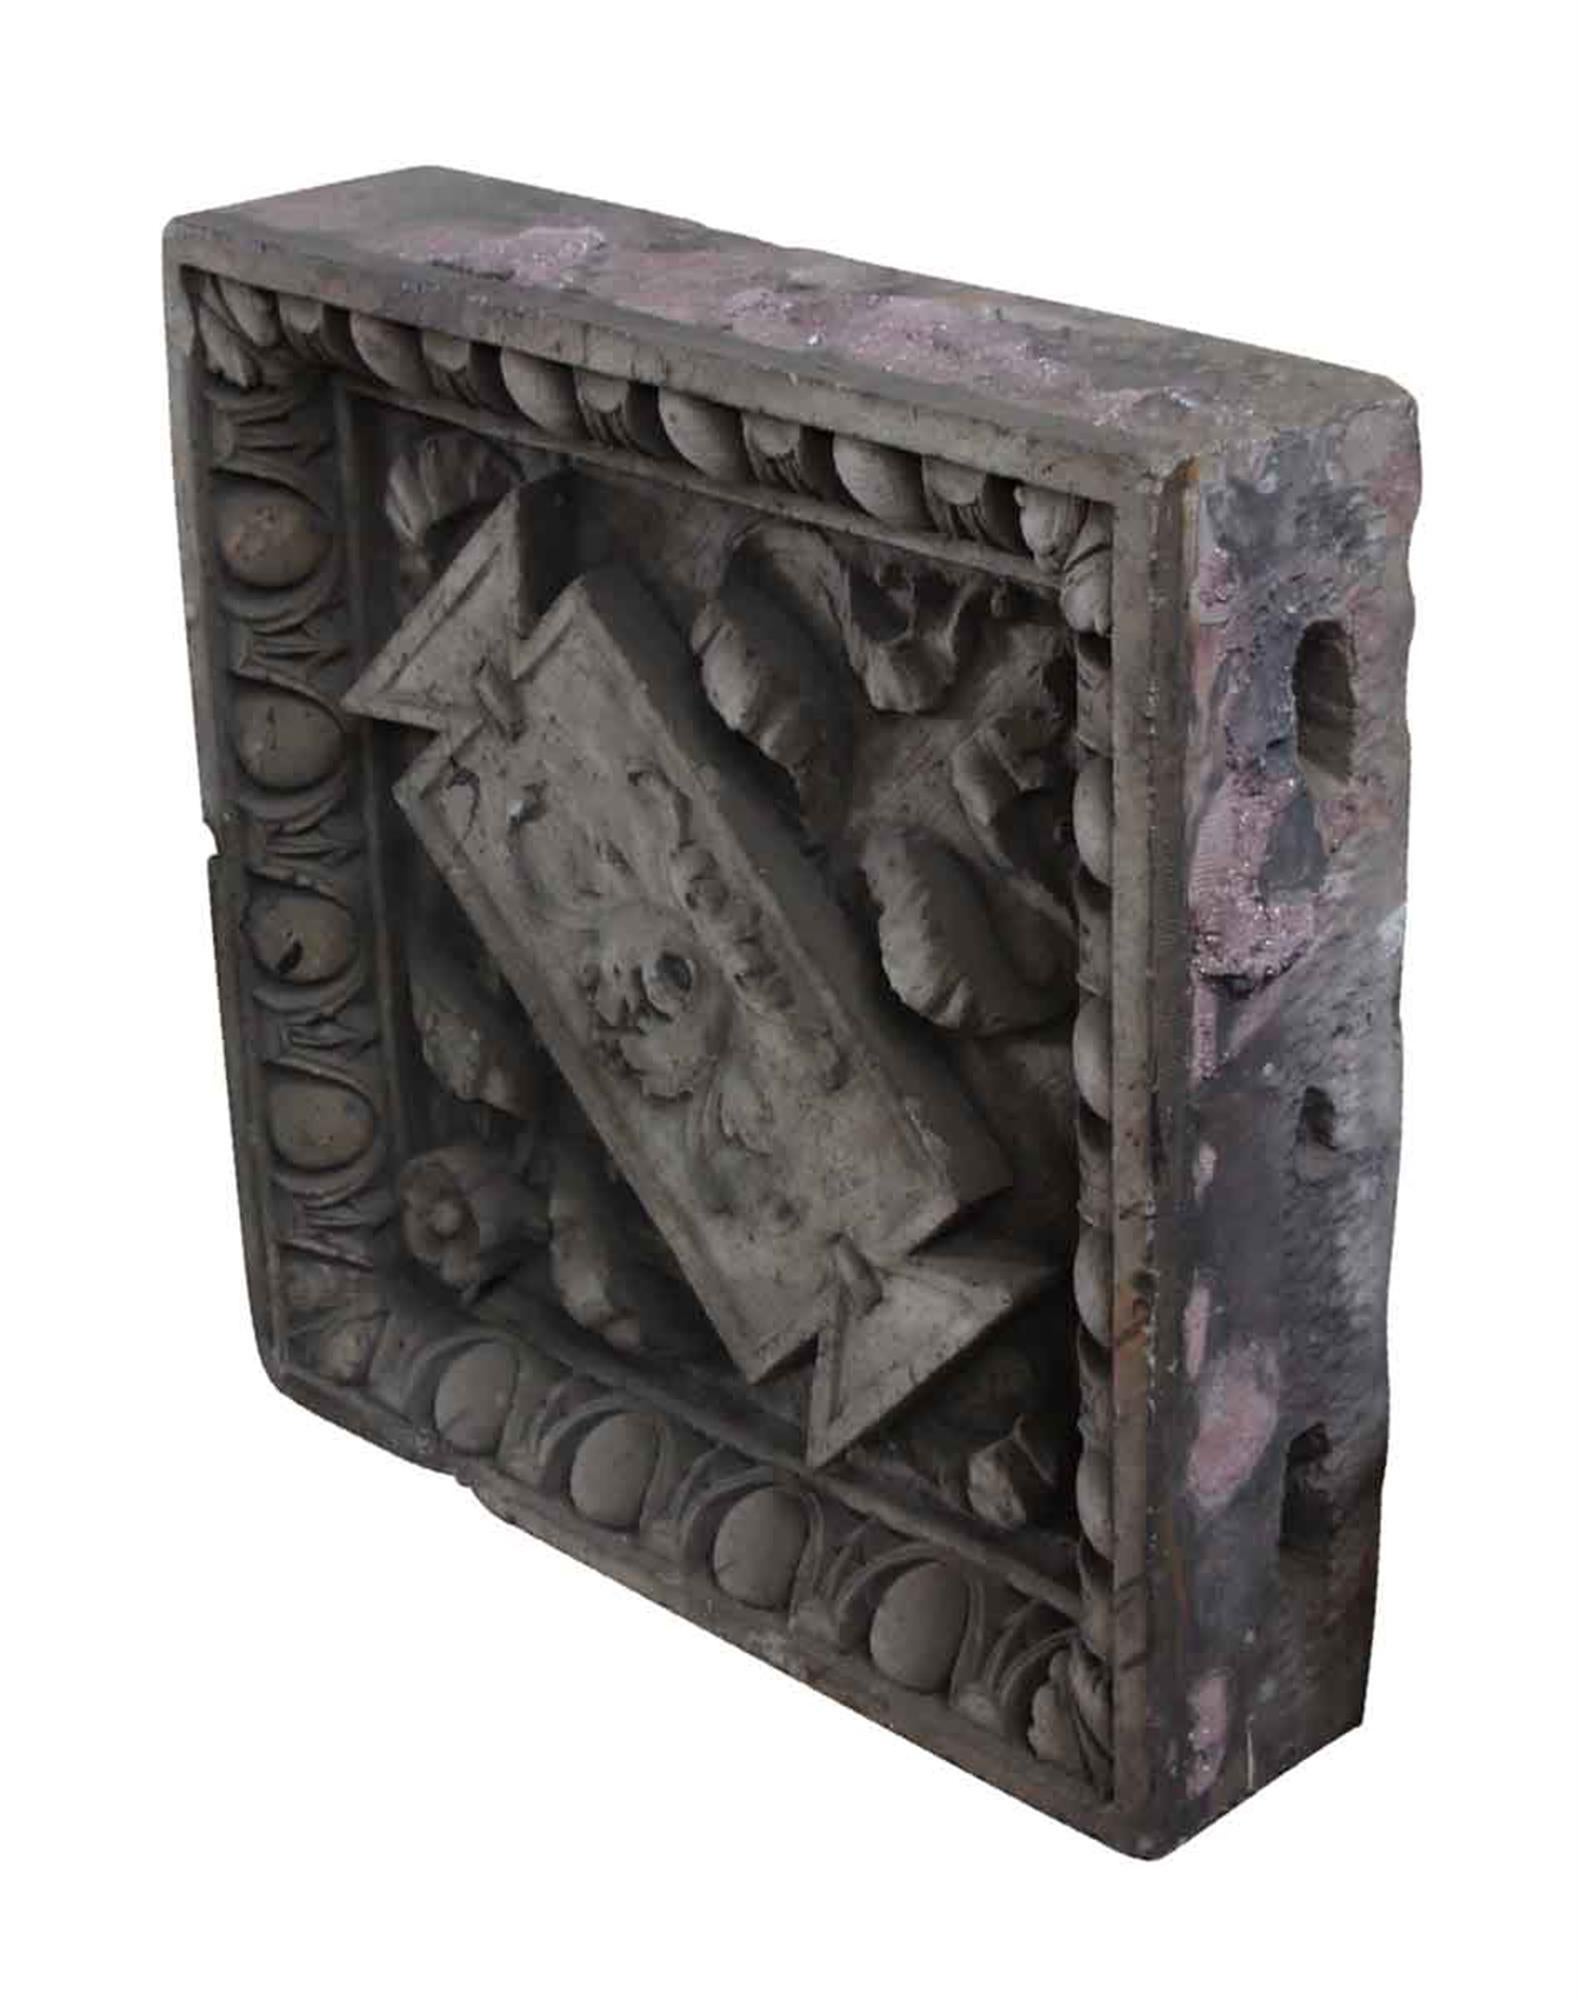 Large highly decorative 1920s terra cotta with an egg and dart border salvaged from the façade of a New York City Building. This would make a great center building piece or garden stone. Please note, this item is located in our Scranton, PA location.